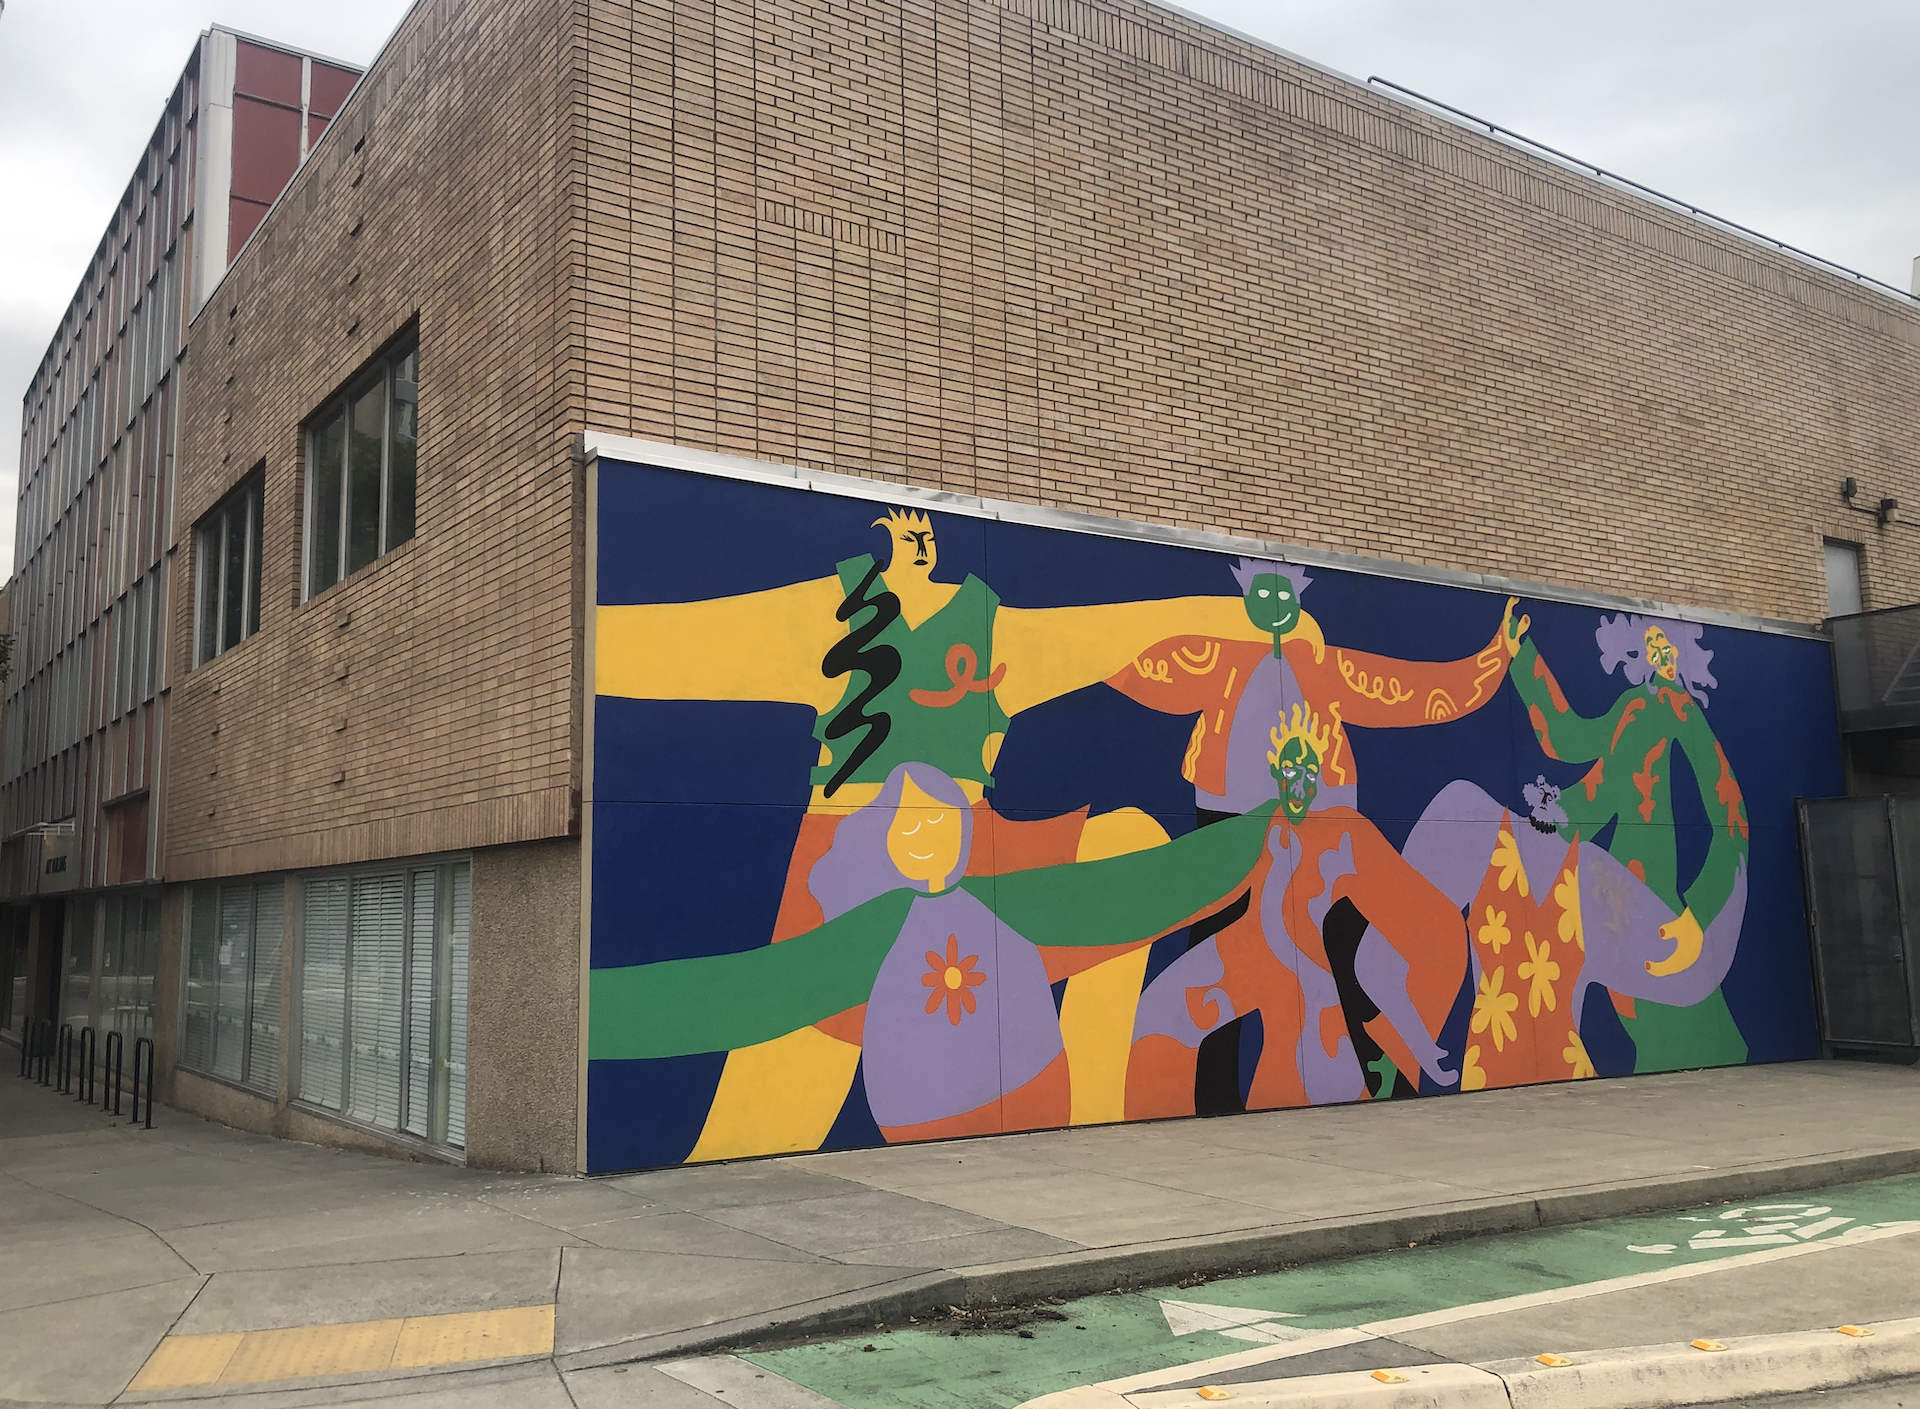 Colorful mural with fanciful figures painted on the south wall of the Art Building